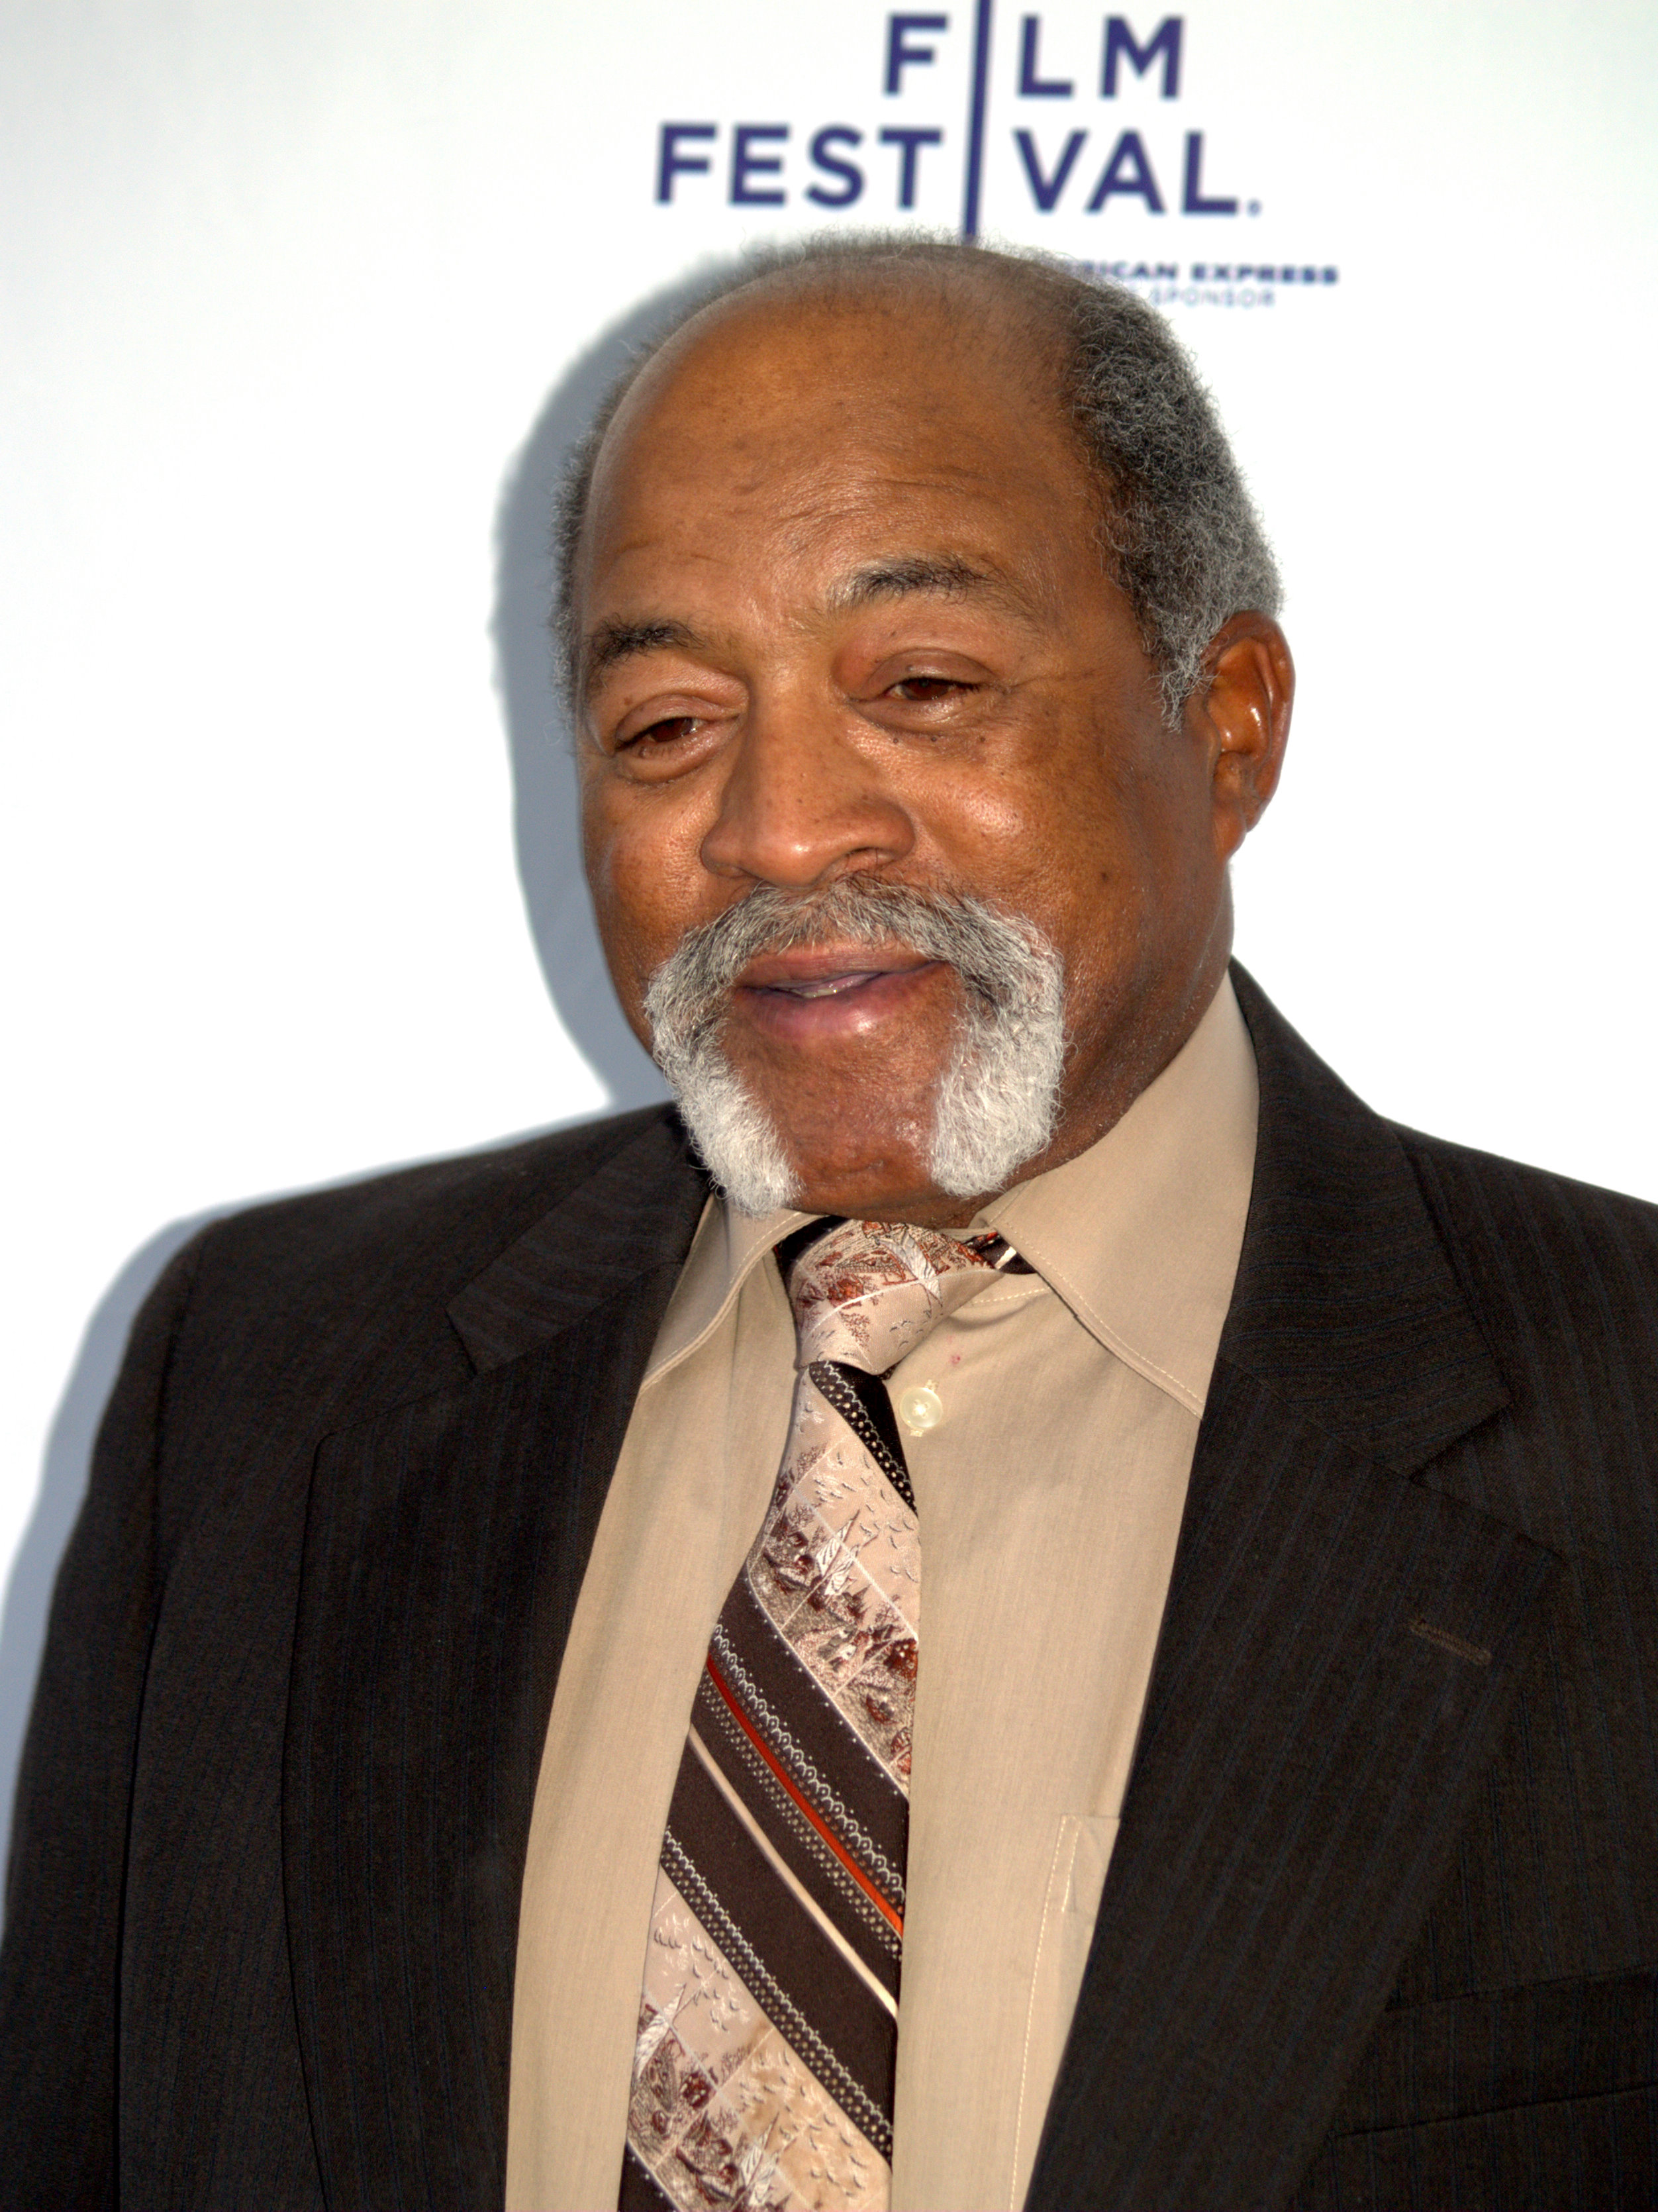 Luis Tiant top career moments